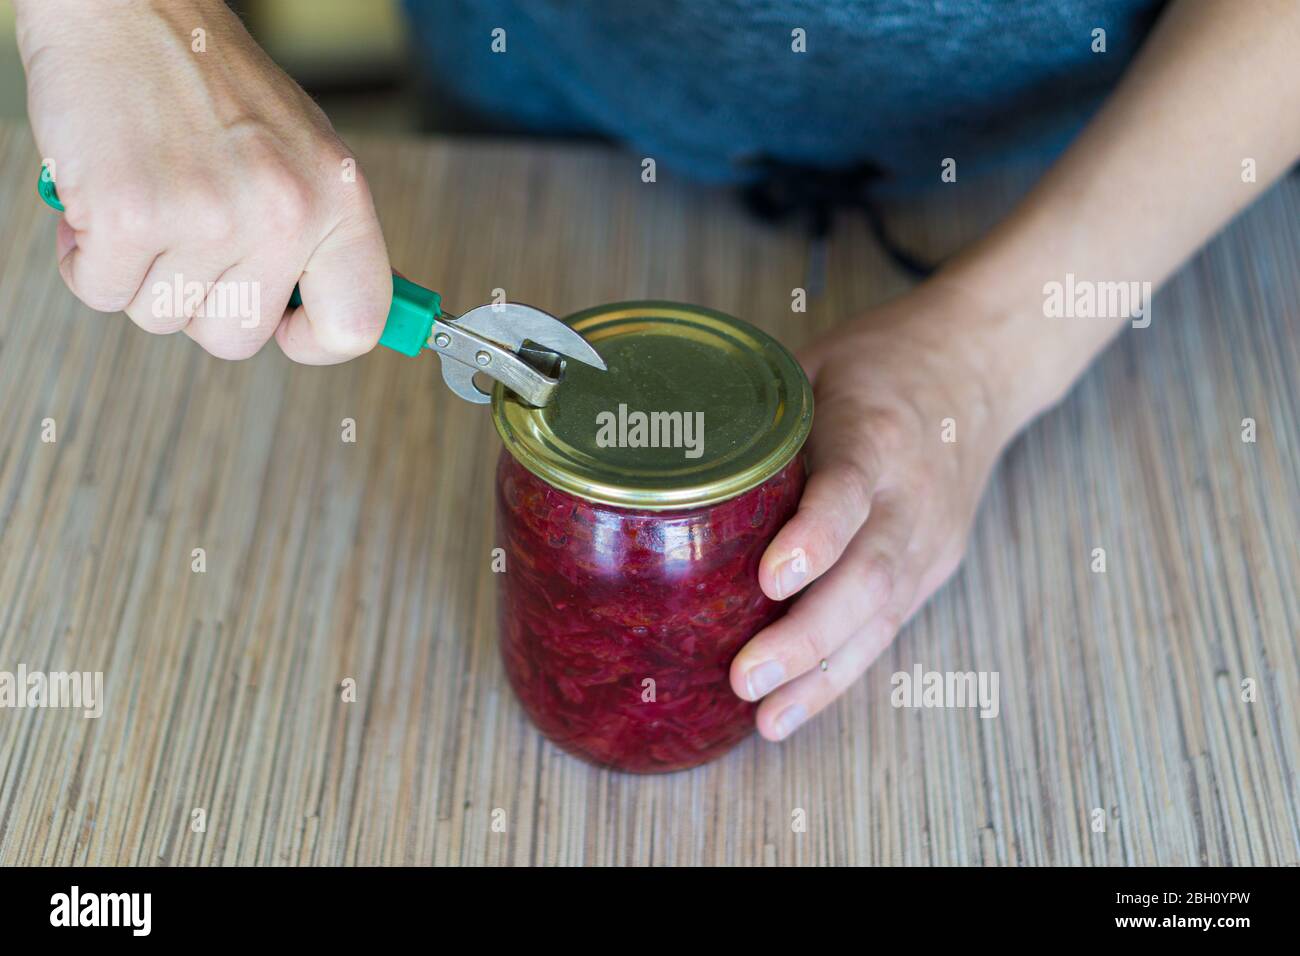 https://c8.alamy.com/comp/2BH0YPW/a-woman-in-the-kitchen-opens-a-can-of-canned-borscht-with-a-hand-held-can-opener-2BH0YPW.jpg